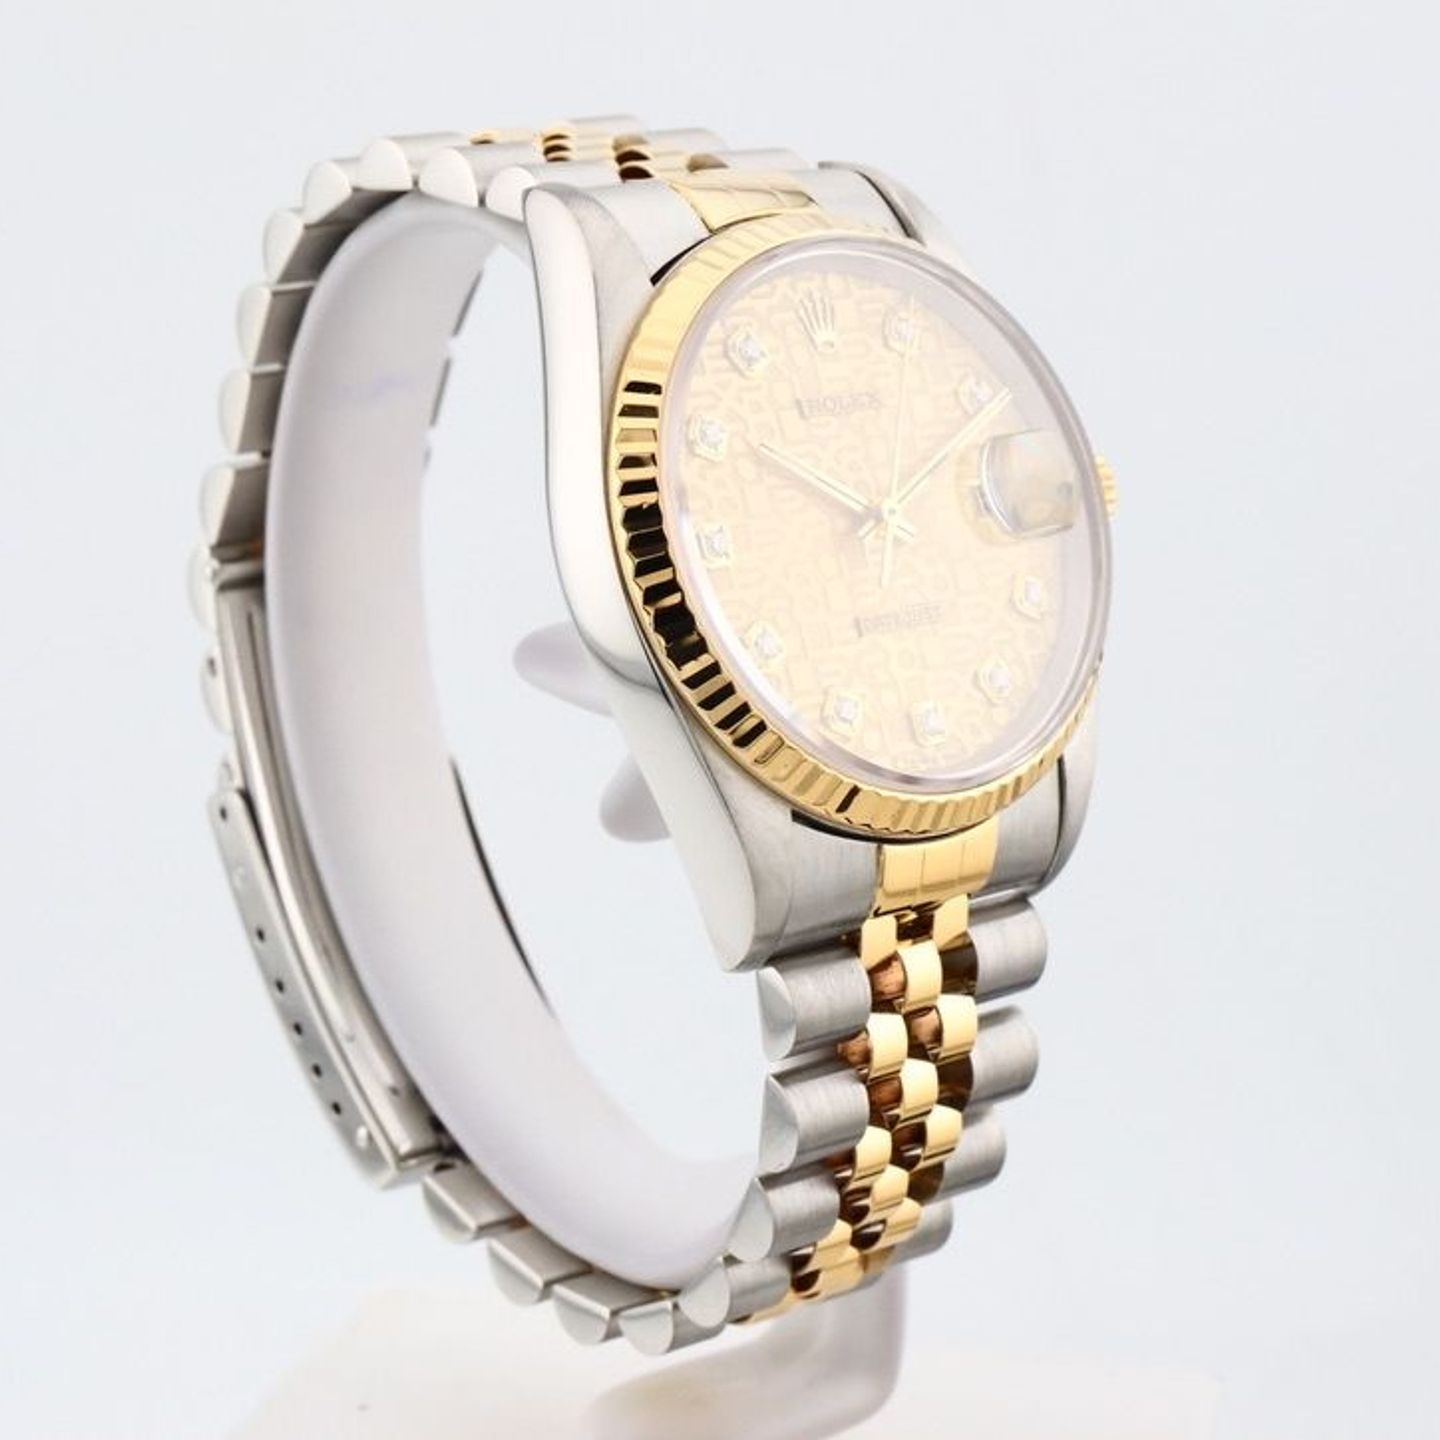 Rolex Datejust 36 16233 (1995) - Gold dial 36 mm Gold/Steel case (8/8)